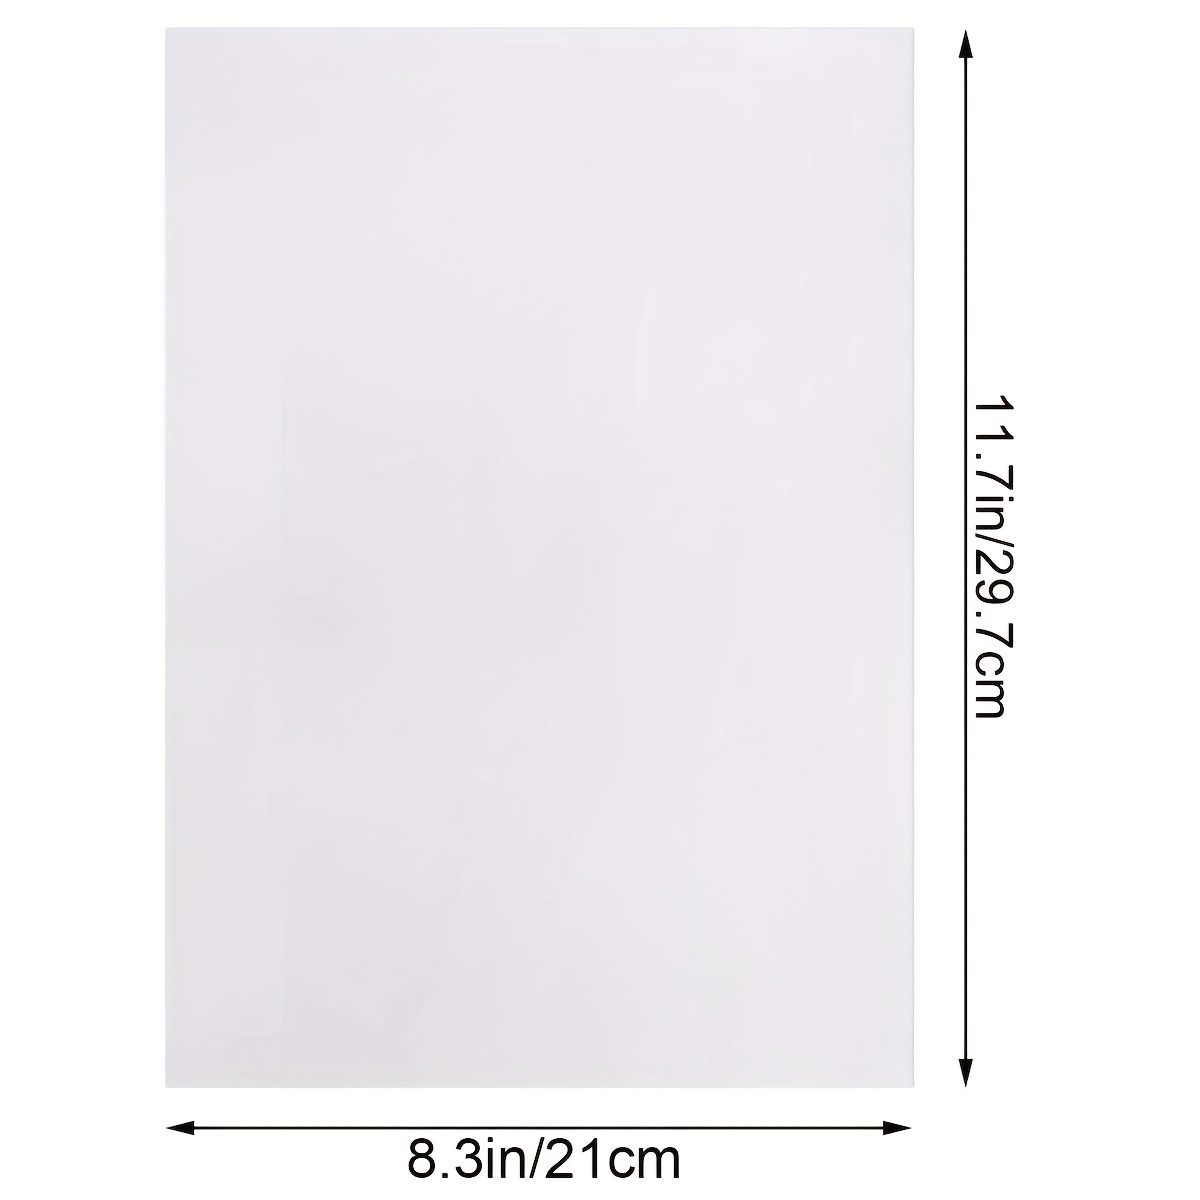 A3 Tracing Paper, 115gsm 200gsm, Translucent Paper, Drafting Paper, 描图纸